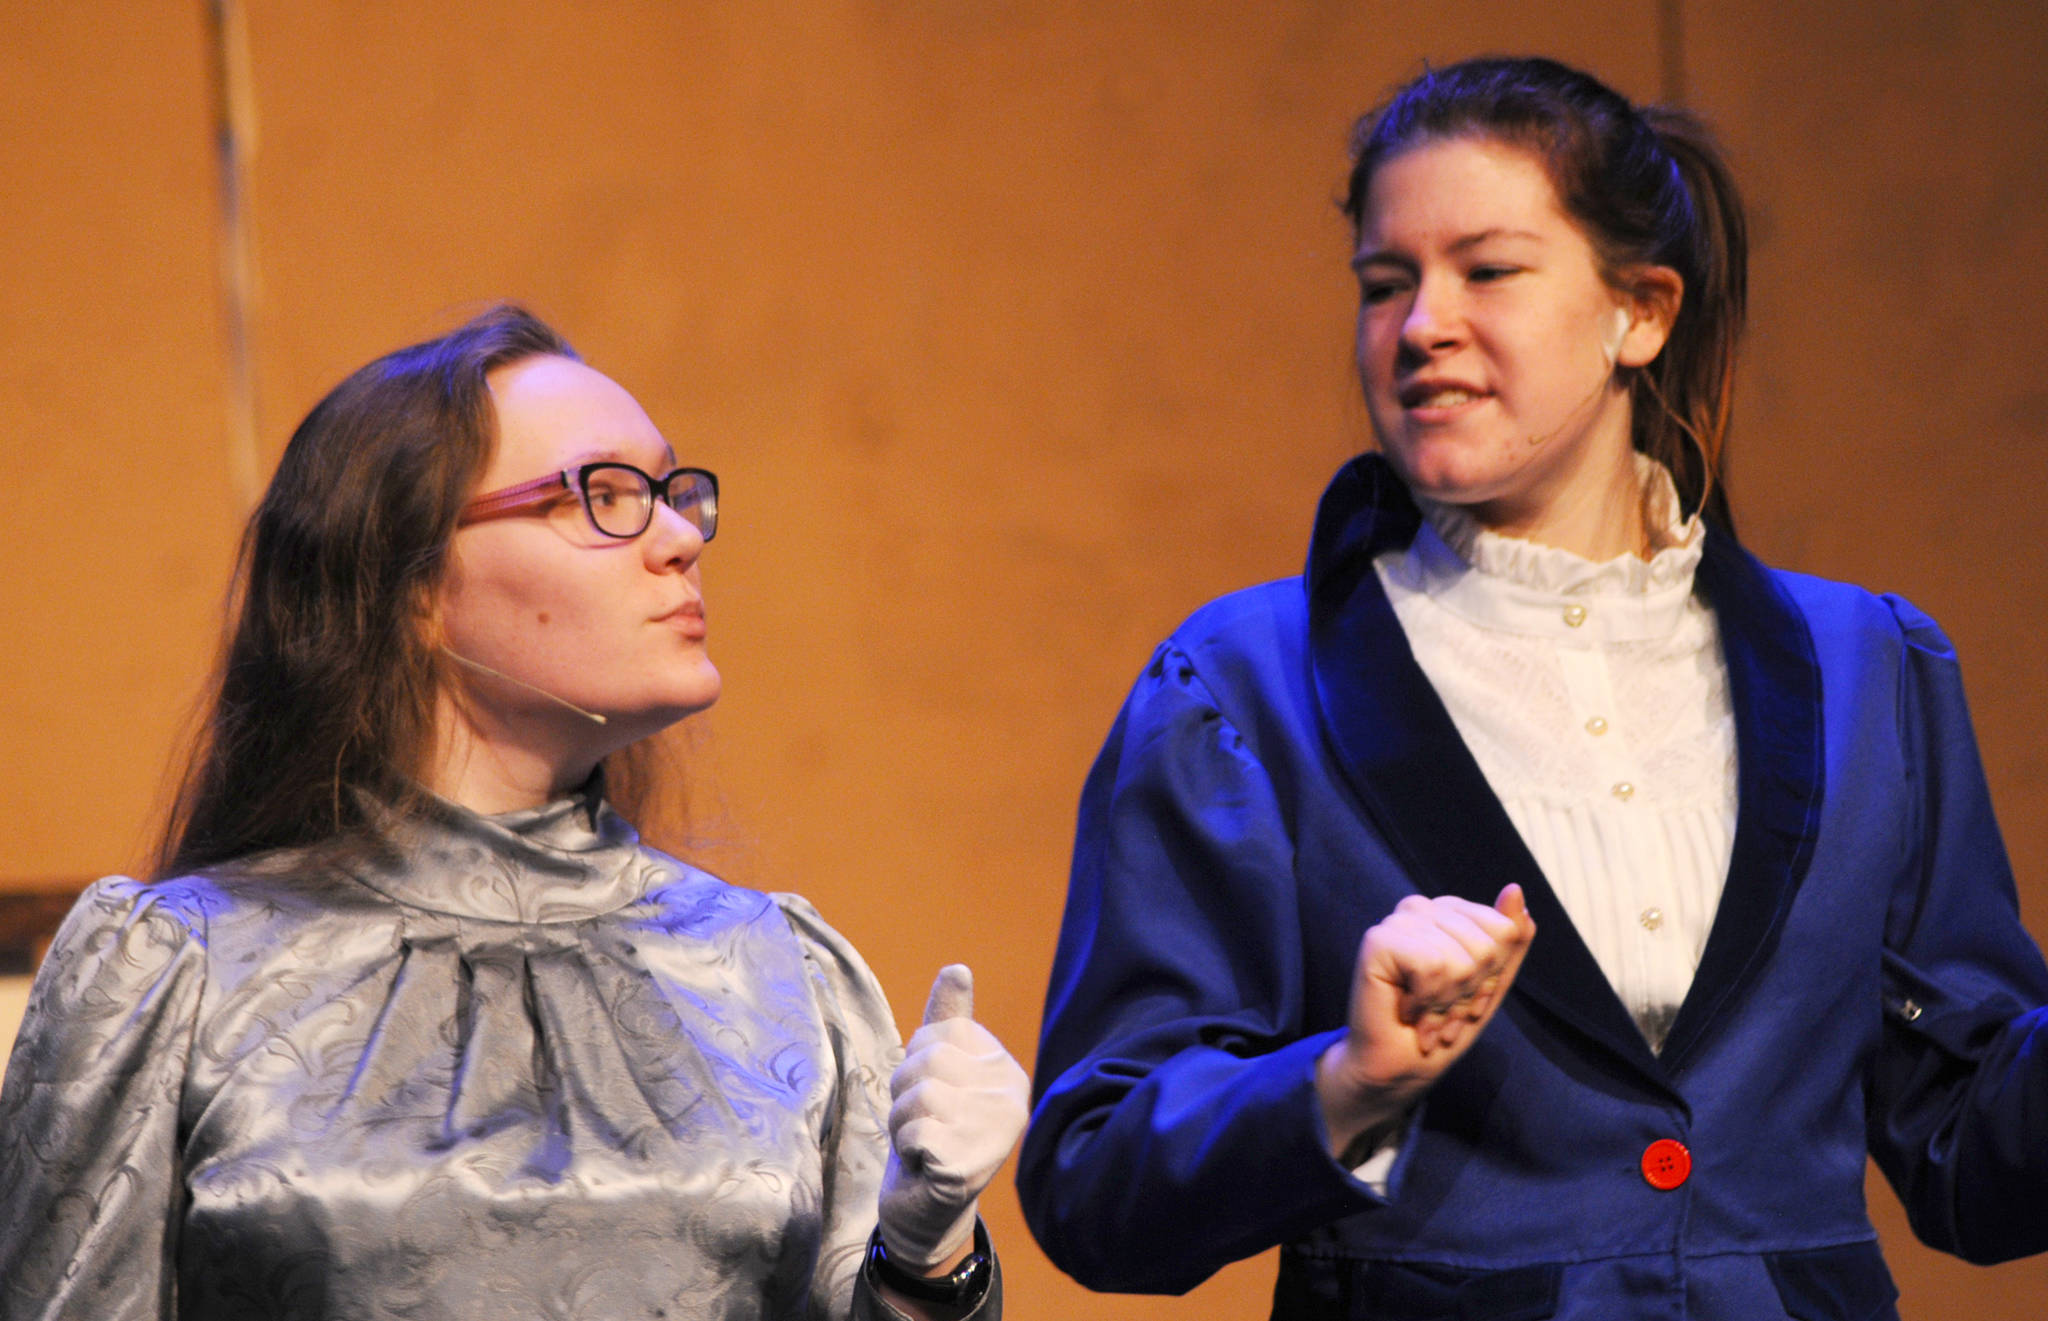 Governess Ms. Andrews (played by Sarah Nash) speaks to Mary Poppins (played by Emilee Tiner) during a dress rehearsal for Nikiski Middle-High School’s production of “Mary Poppins” on Monday, April 23, 2018 in Nikiski, Alaska. The play premiers Friday at 7 p.m. at the high school. Tickets are $15. (Photo by Elizabeth Earl/Peninsula Clarion)